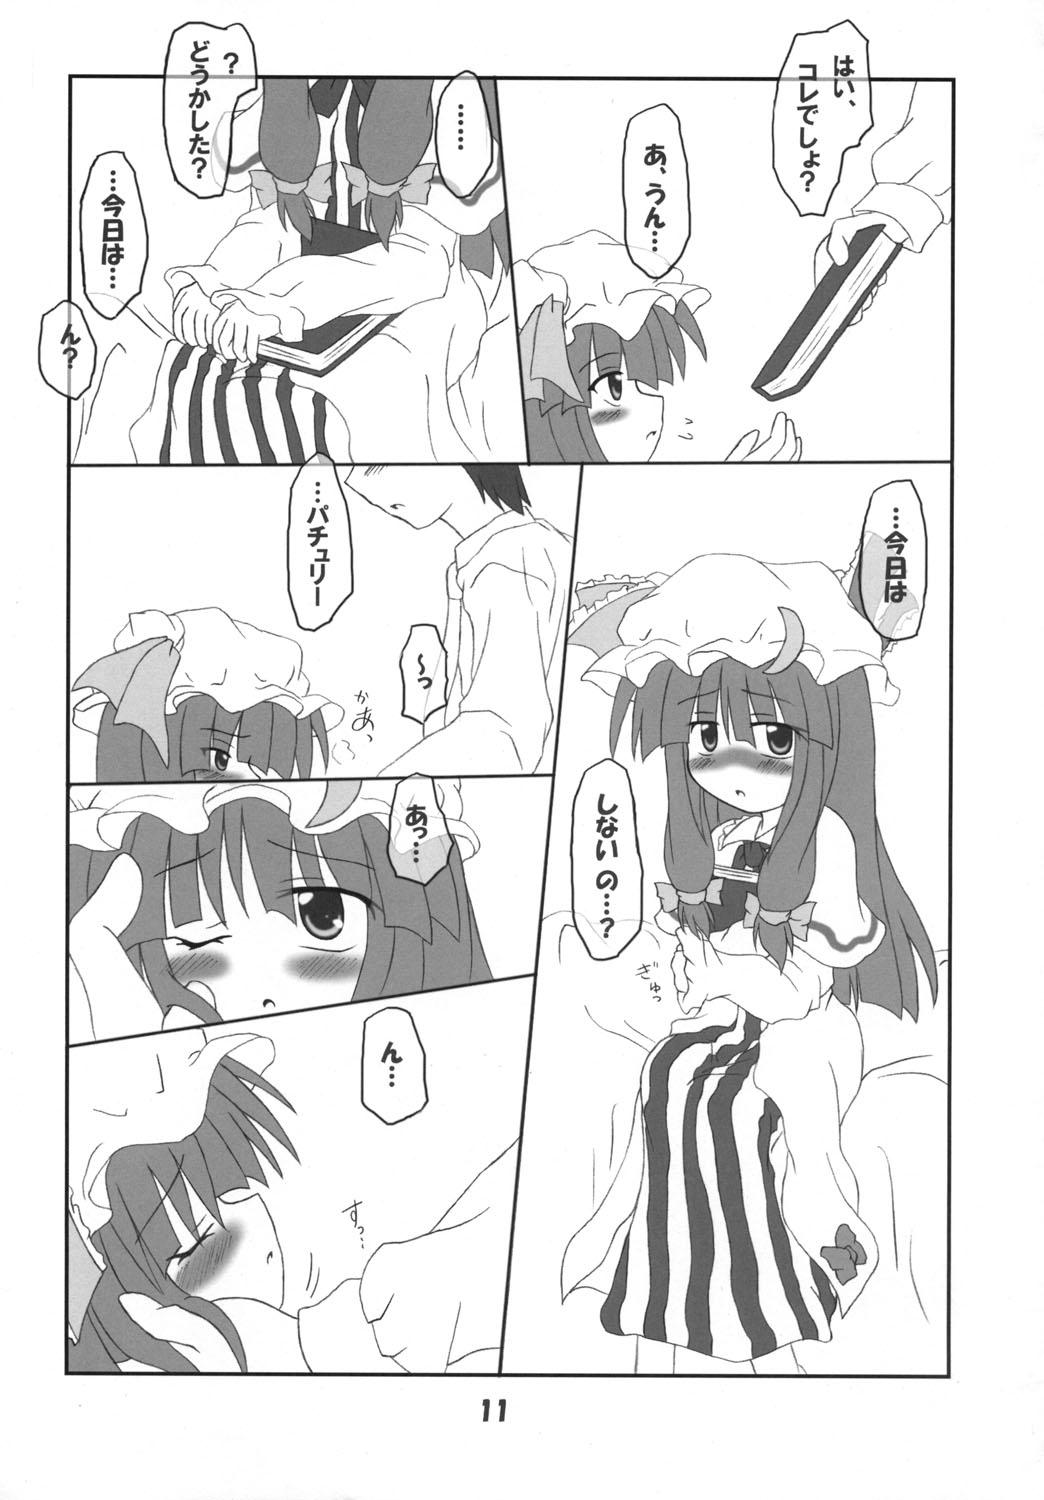 Flashing Rollin 18 - Touhou project Amateurs Gone - Page 10